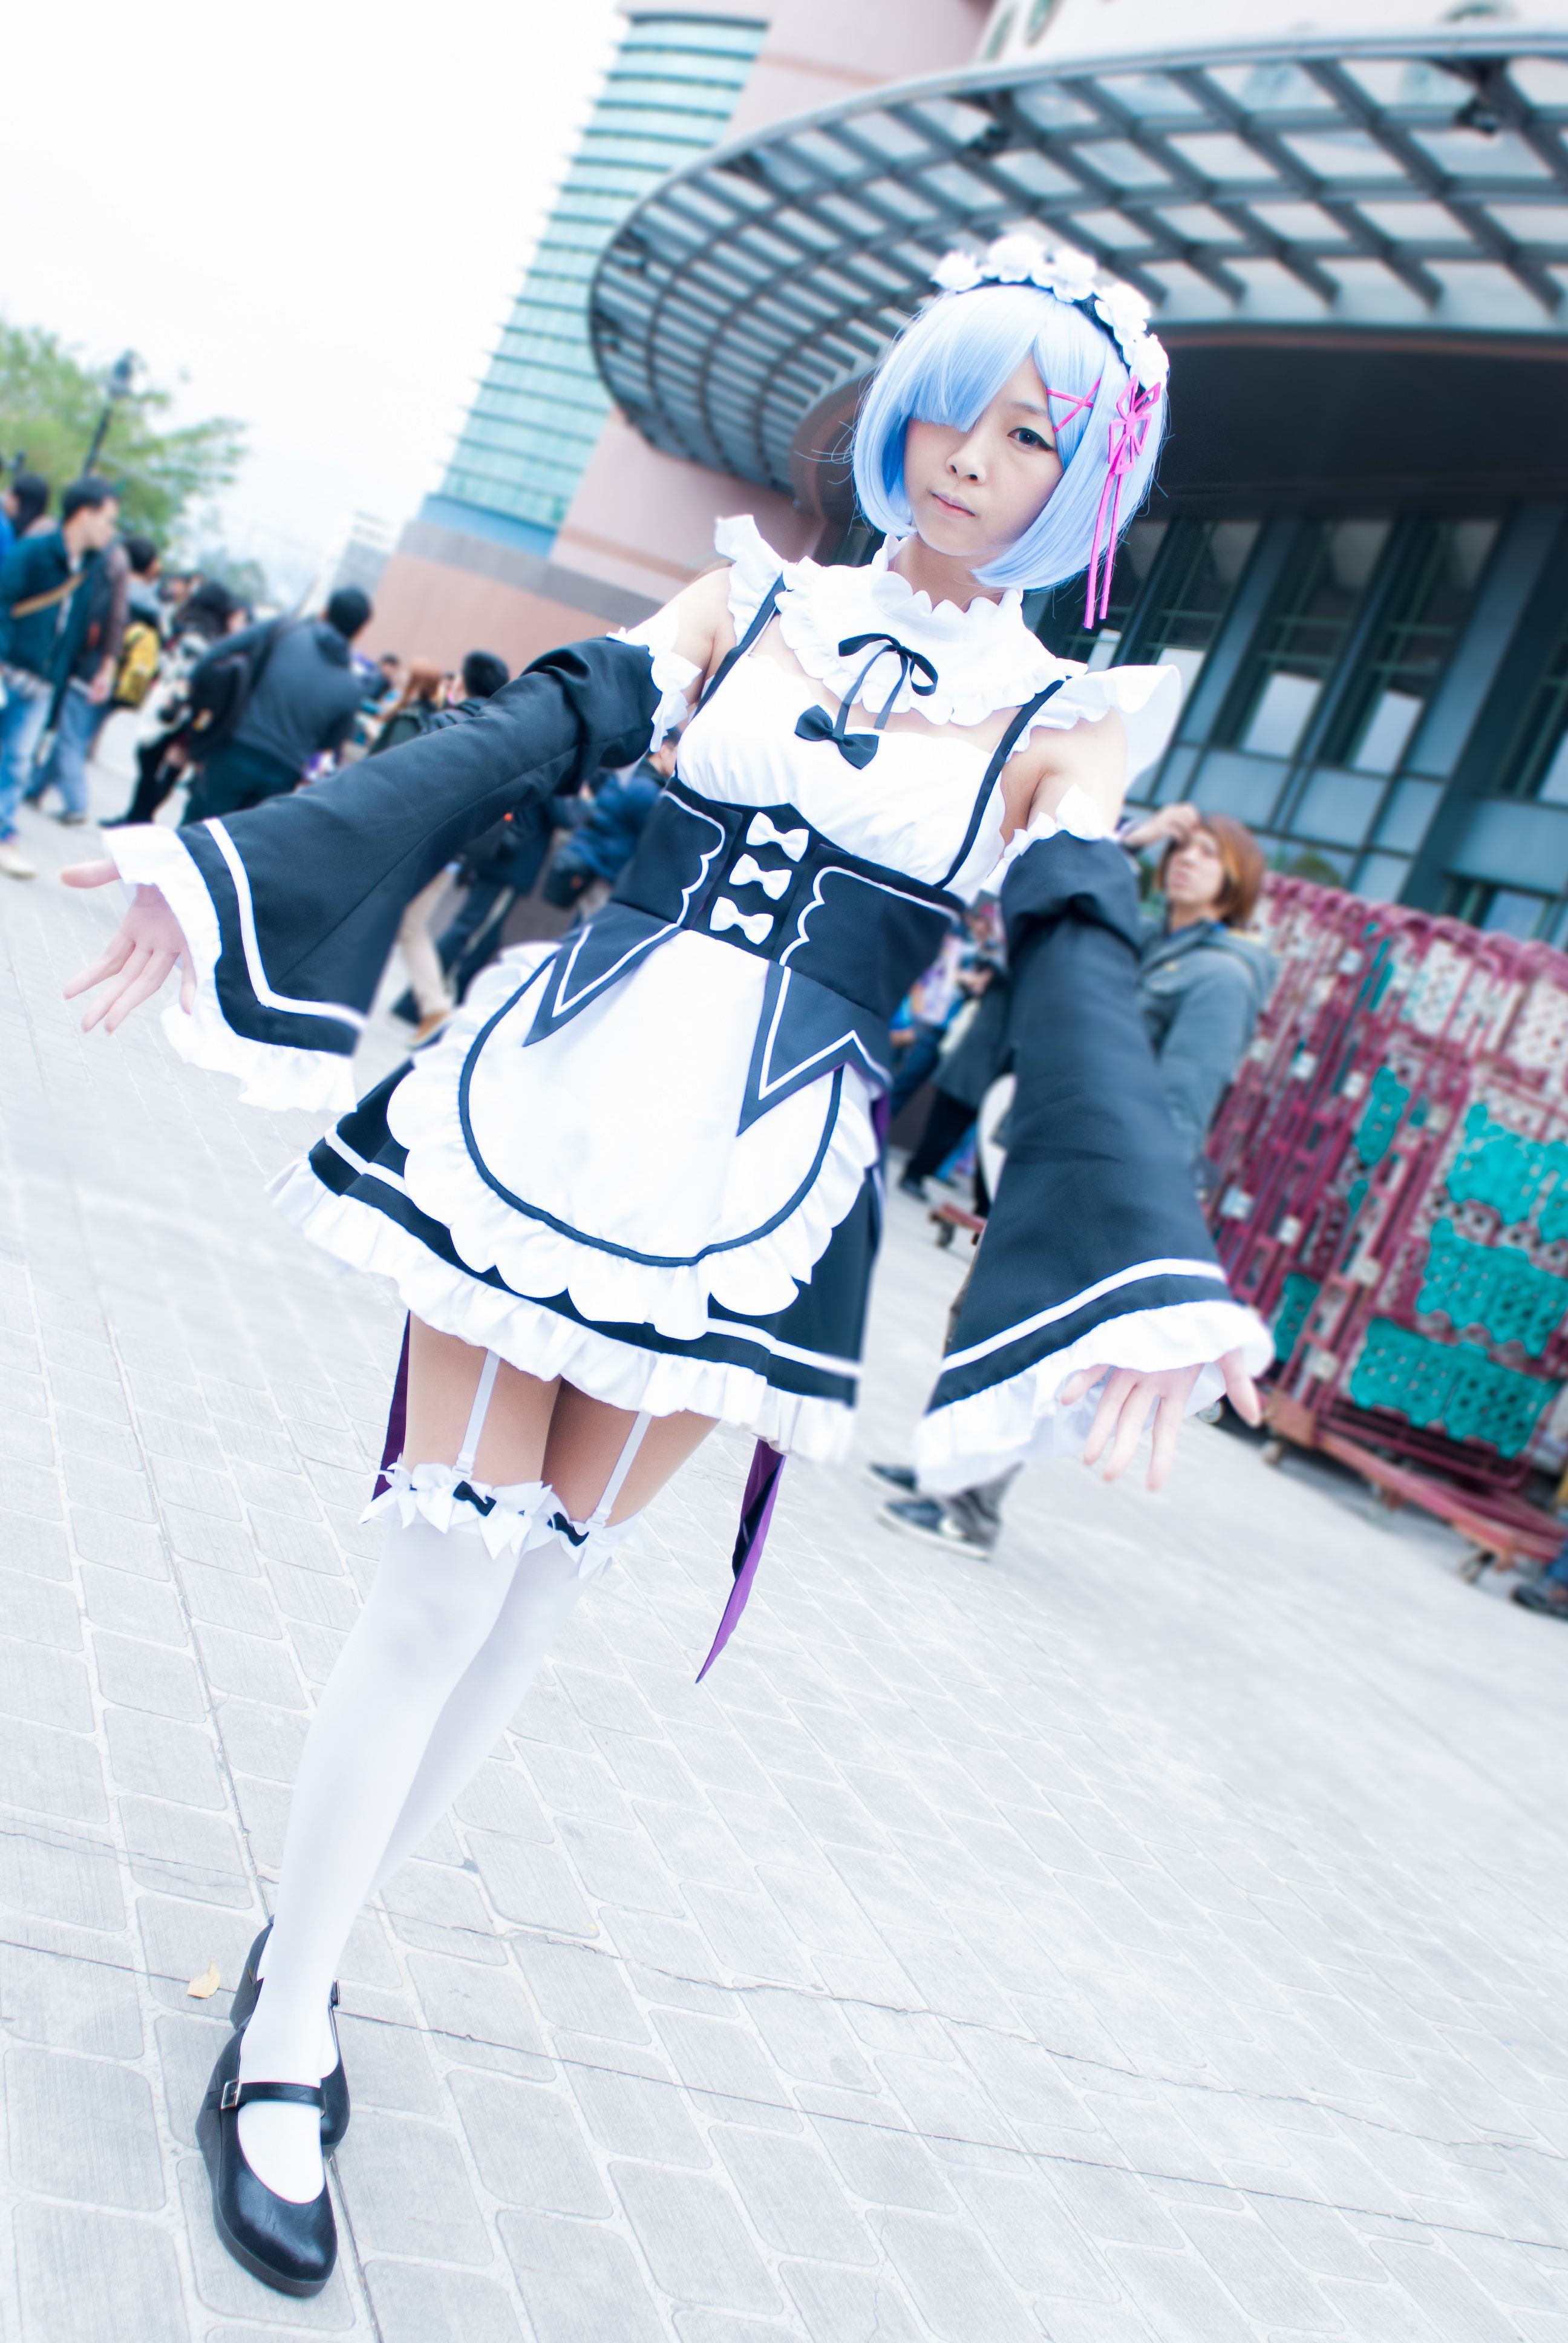 Rem from Re:Zero − Starting Life in Another World